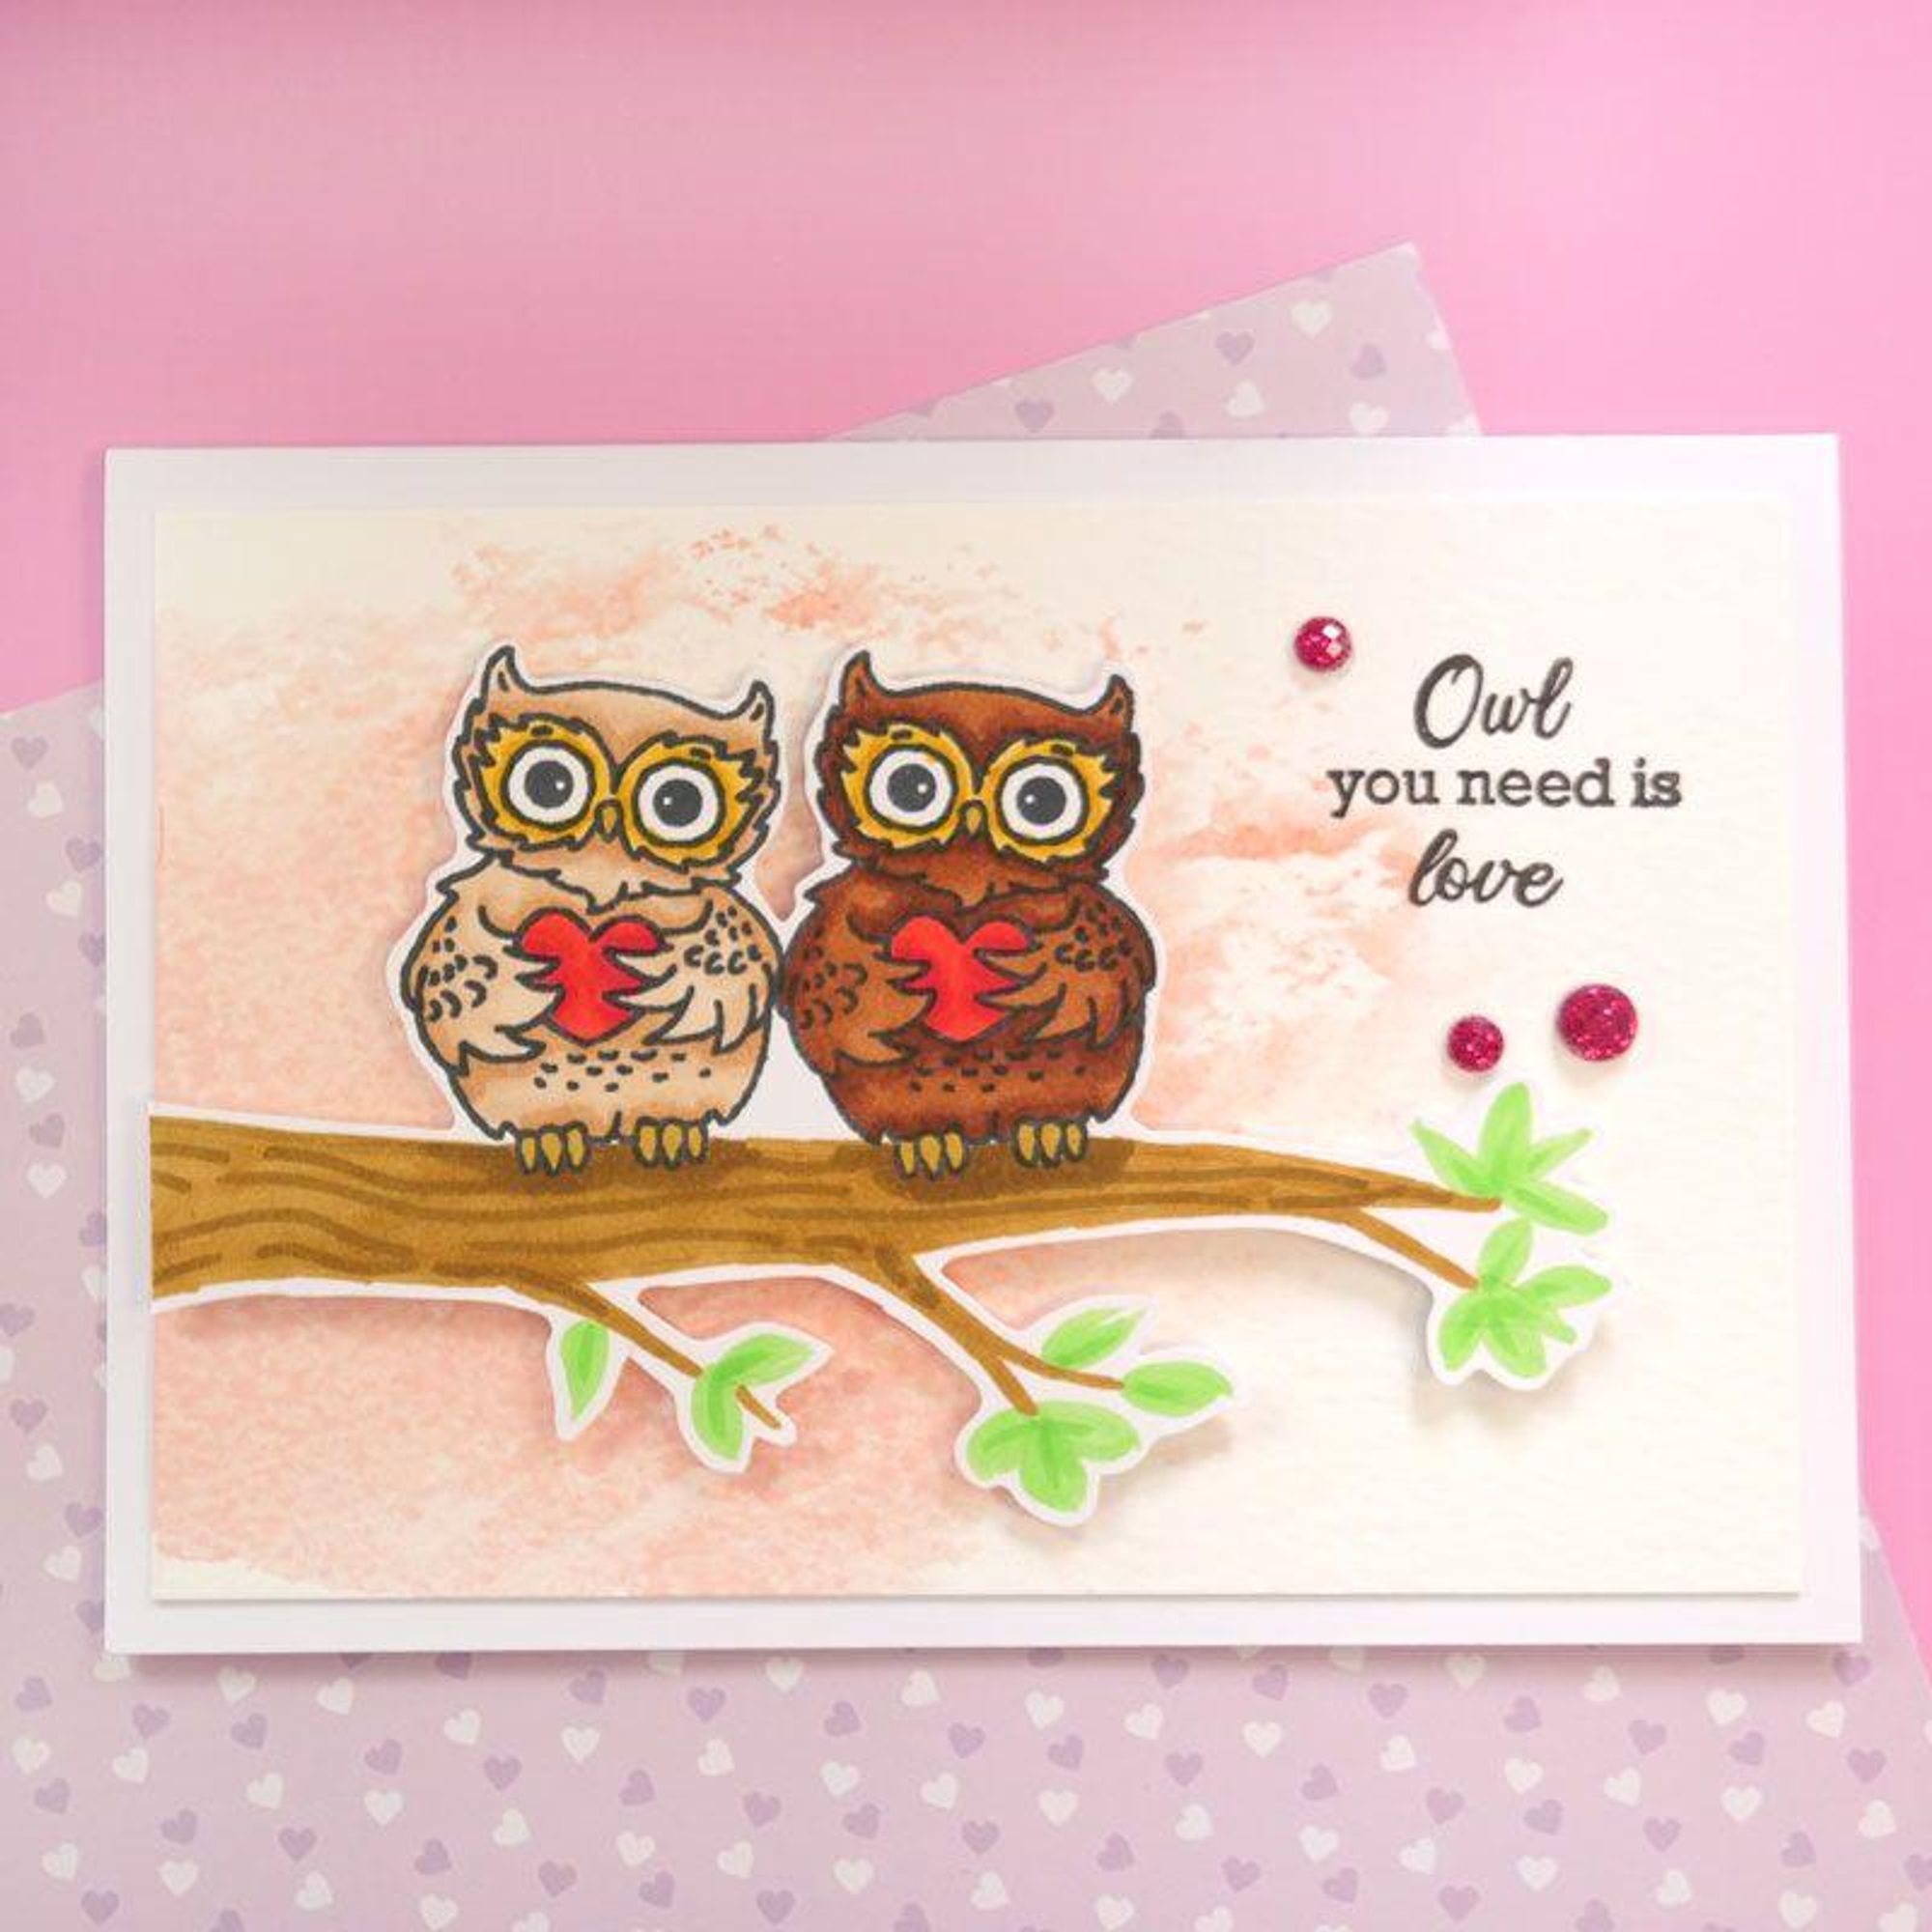 For the Love of Stamps - Owl You Need